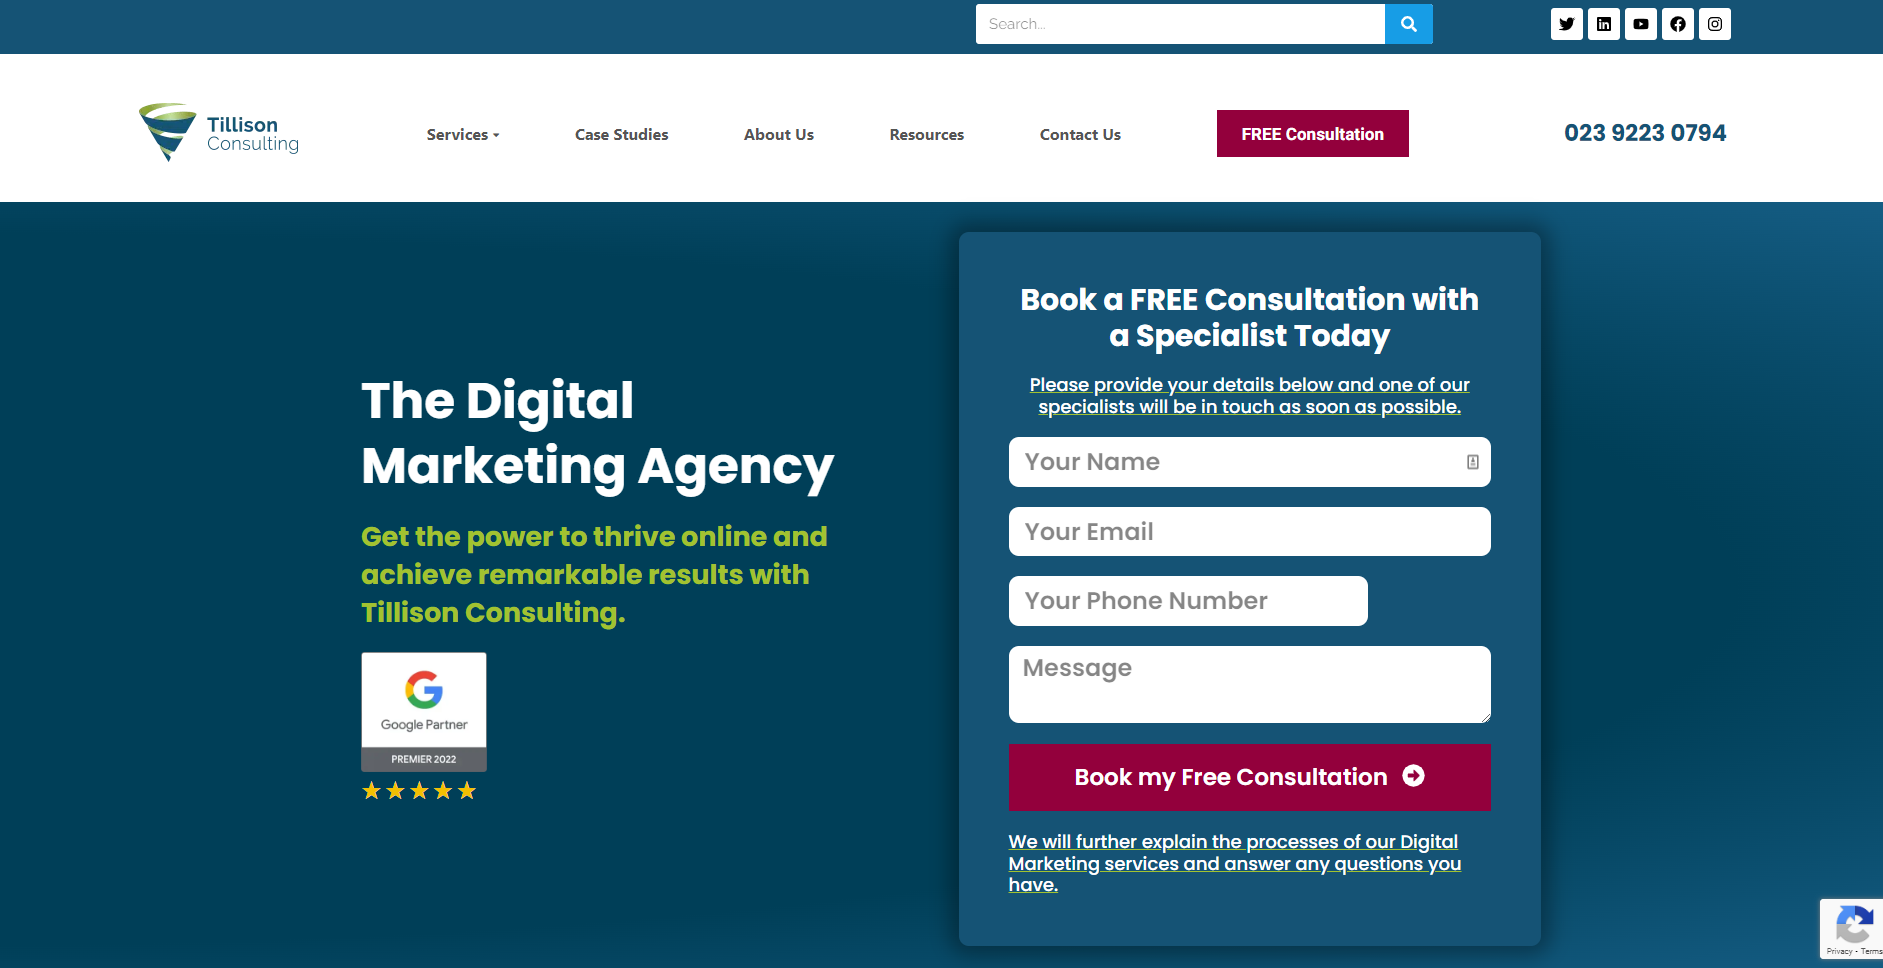 tillison consulting, the digital marketing agency, ecommerce site